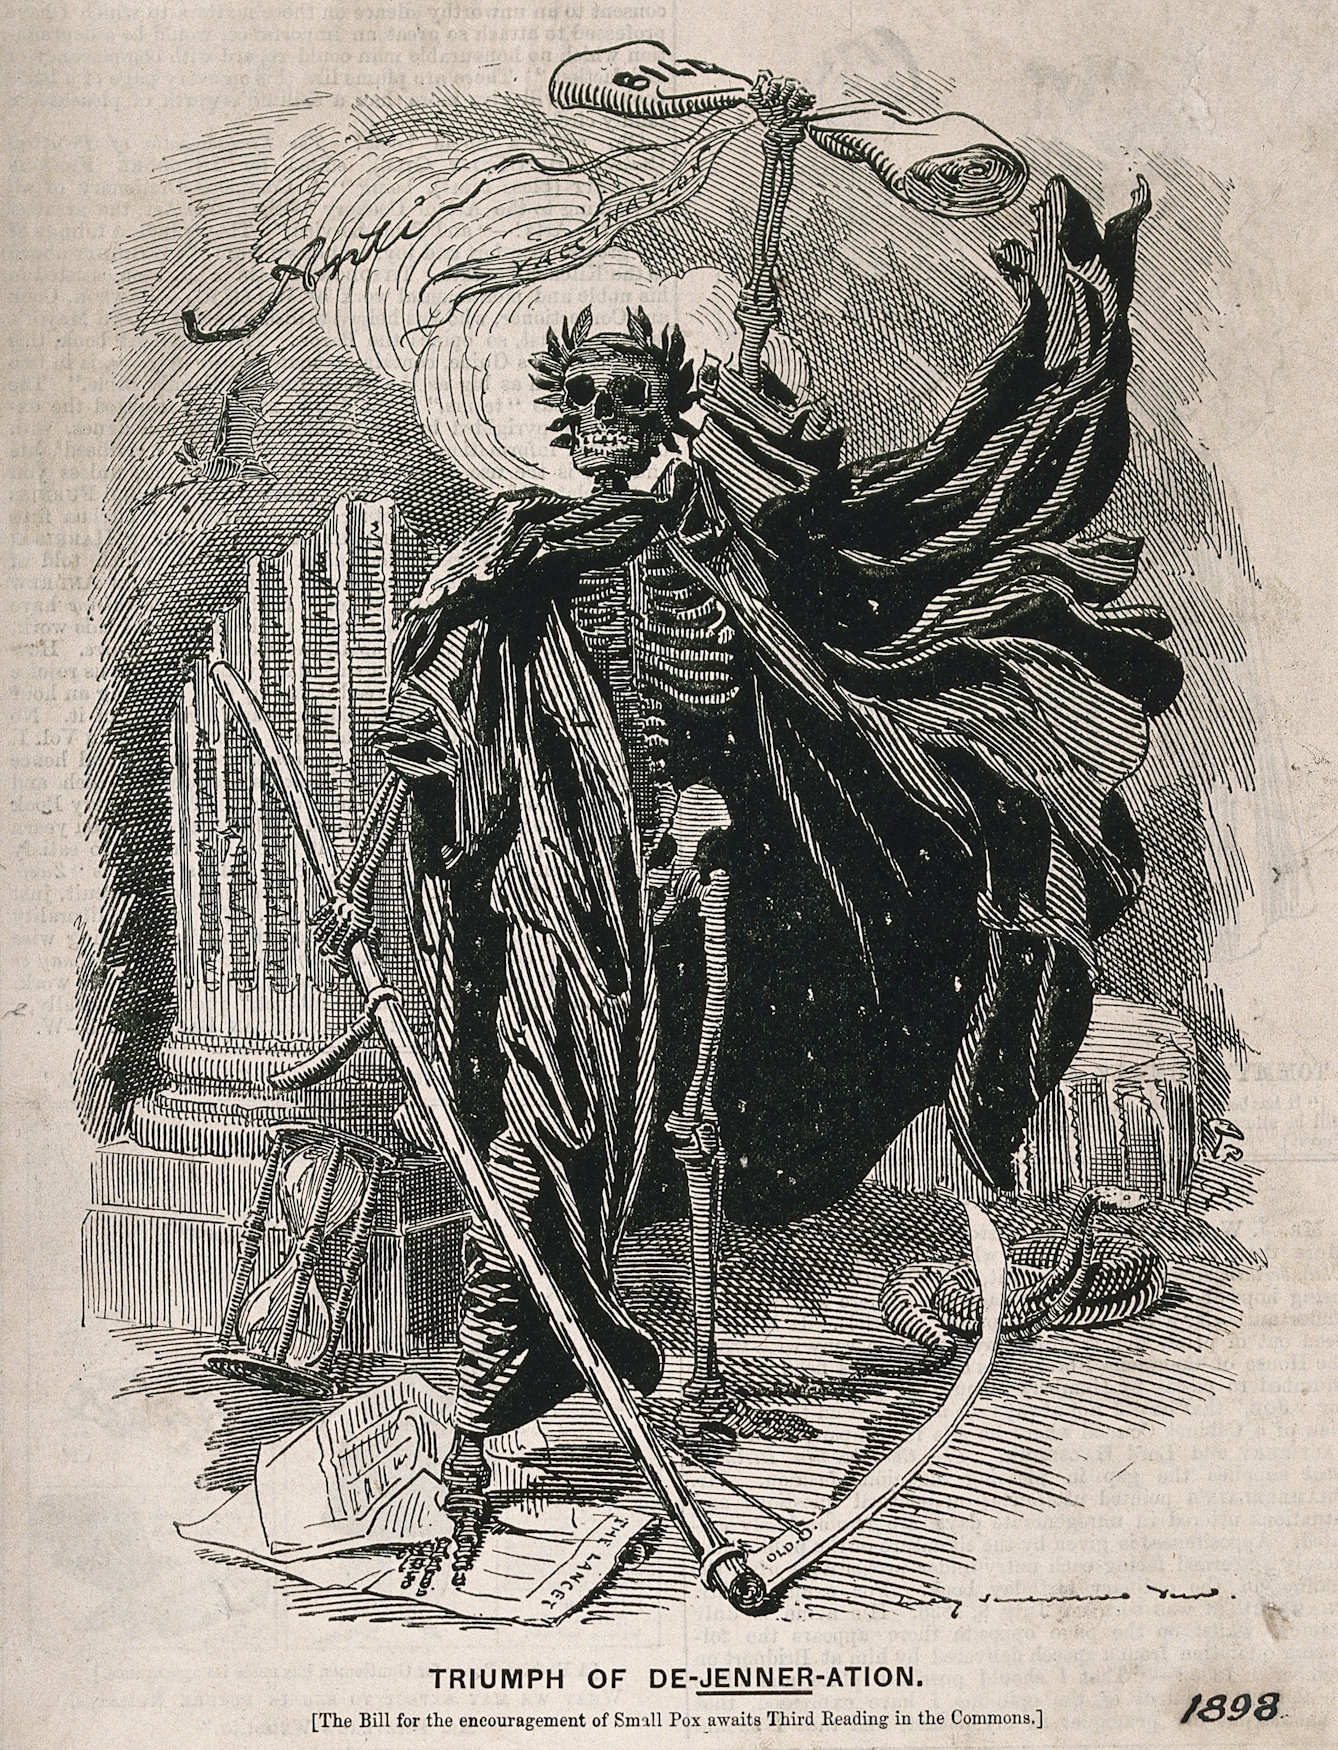 Death as a skeletal figure wielding a scythe, representing fears concerning the Act of 1898 which made vaccination against smallpox compulsory. 